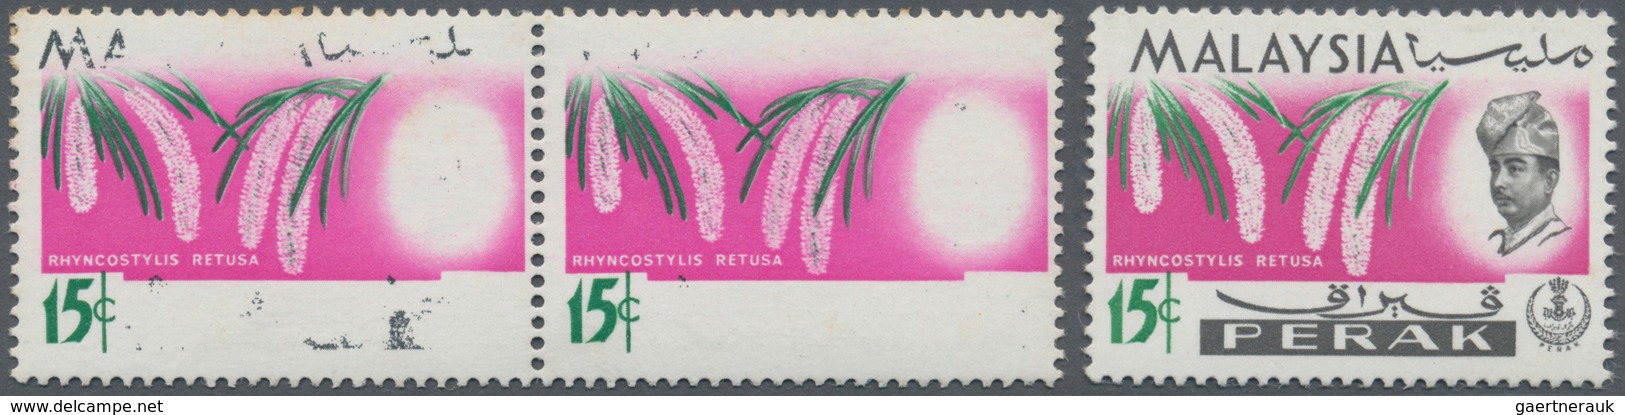 06819 Malaiische Staaten - Perak: 1965, Orchids 15c. 'Rhynchostylis Retusa' With Partly BLACK OMITTED (cou - Perak